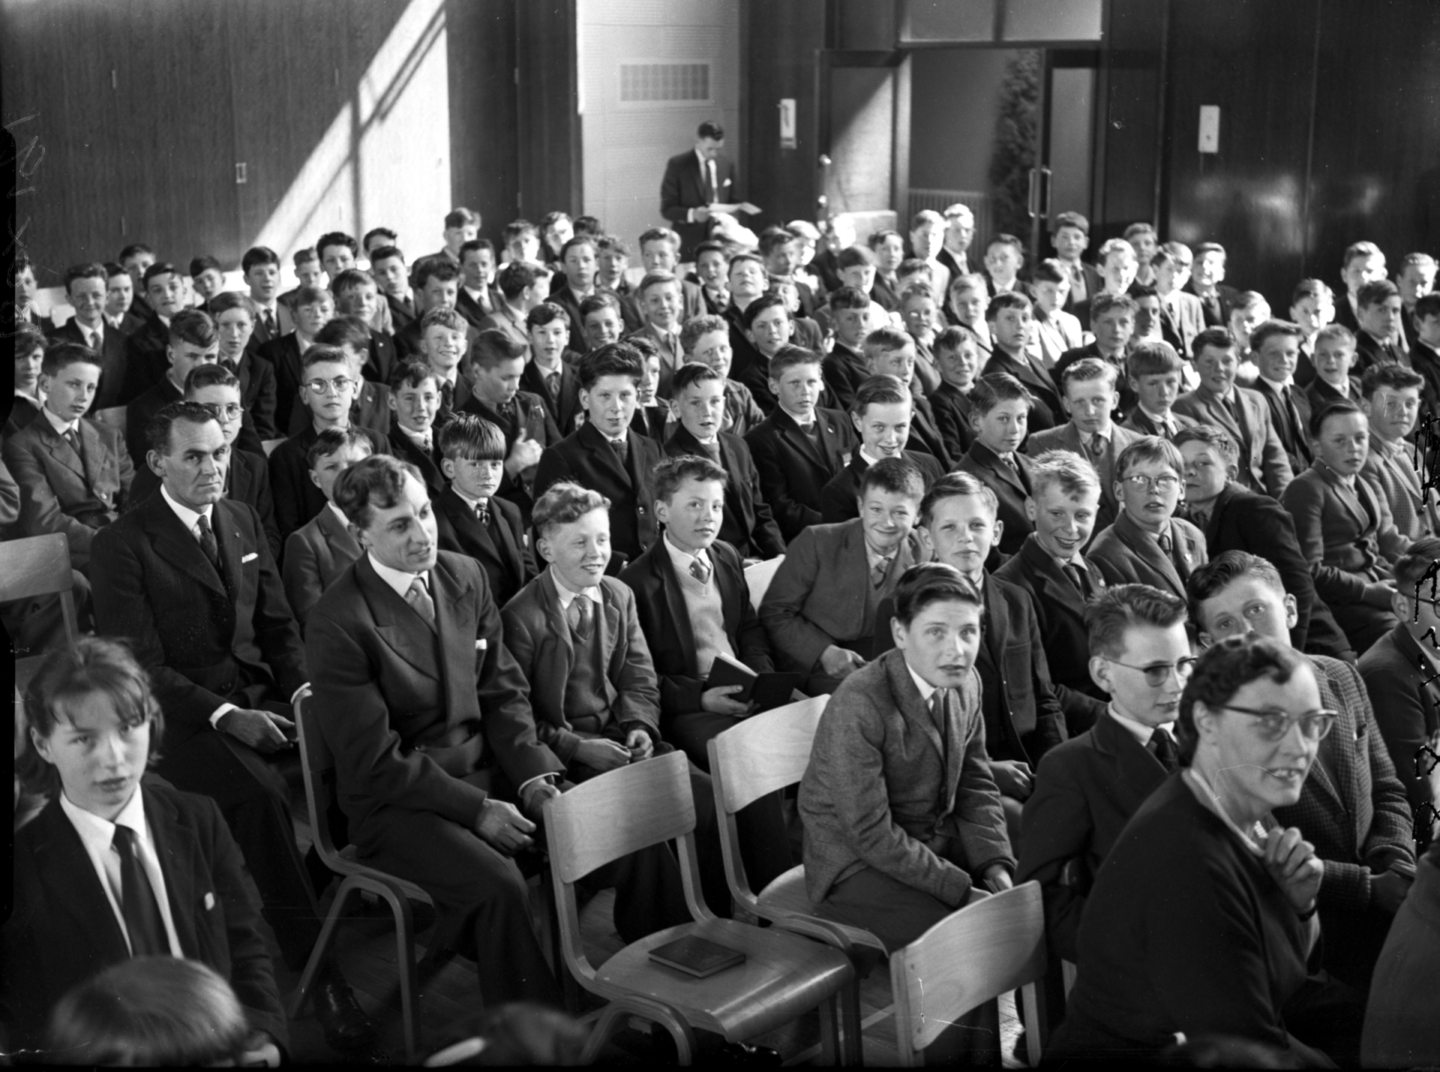 Schoolchildren and teachers sitting in neat rows on chairs in a school assembly hall look at the camera as their photo is taken.